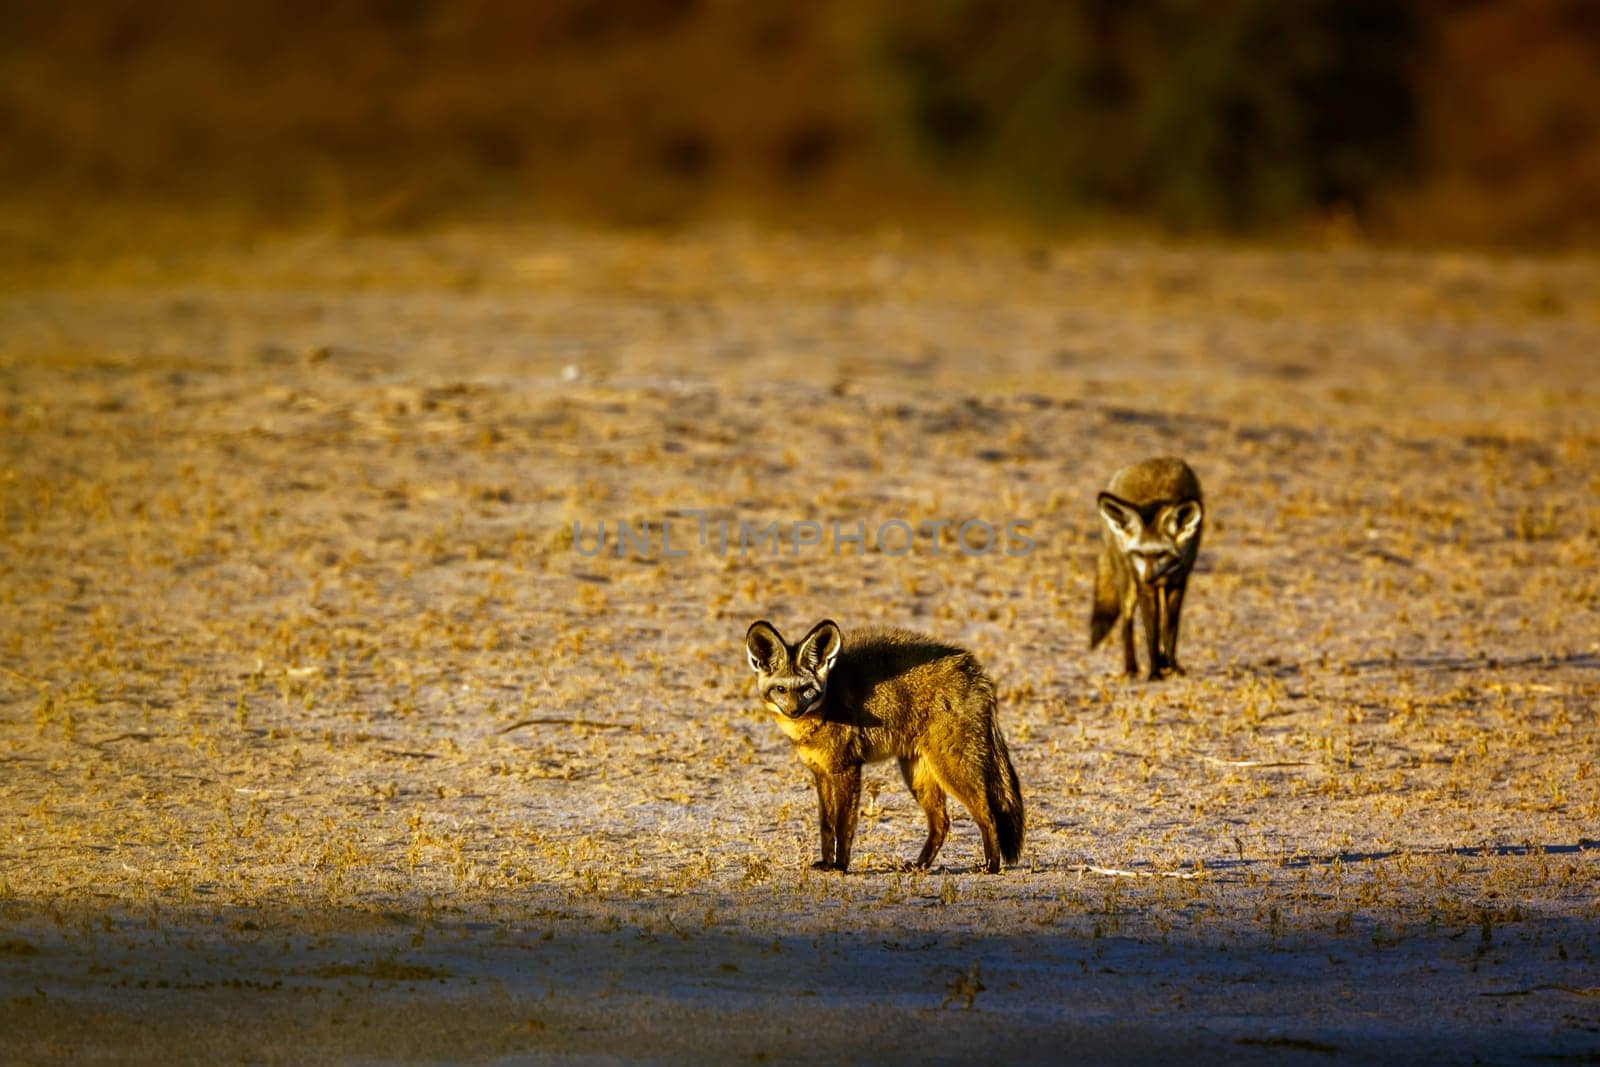 Two Bat-eared fox standing front view in dry land in Kgalagadi transfrontier park, South Africa; specie Otocyon megalotis family of Canidae 